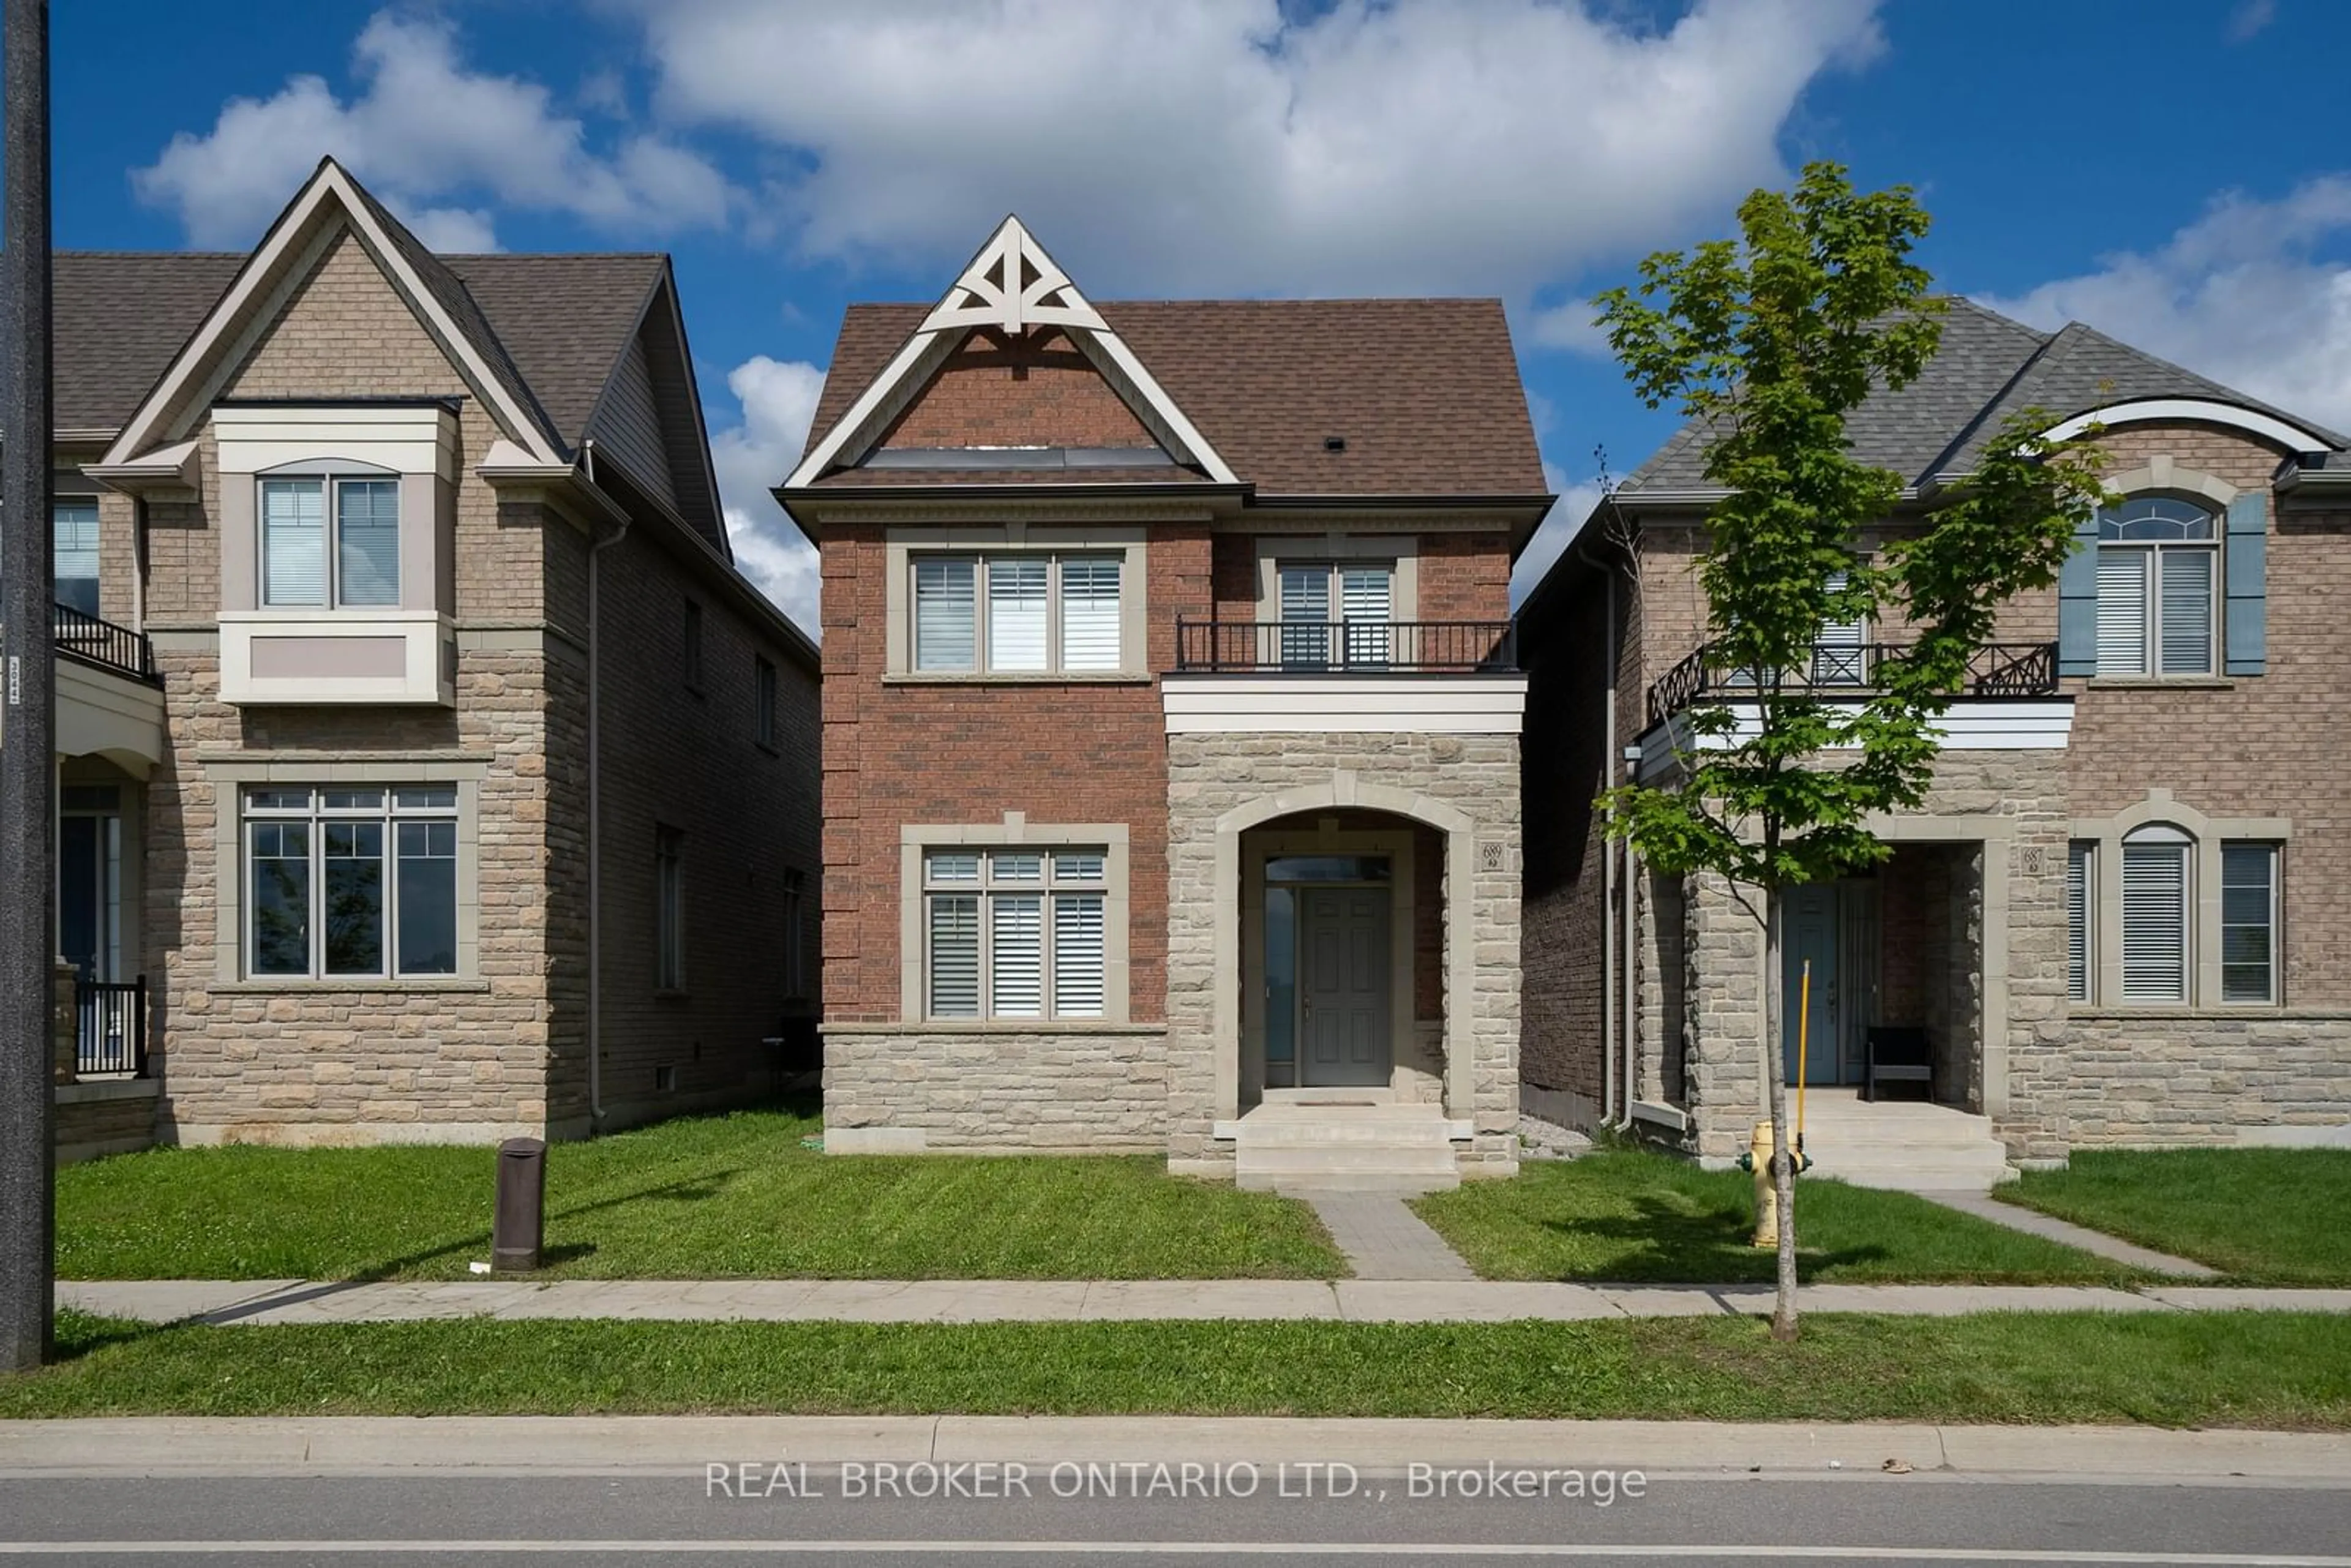 Home with brick exterior material for 689 Murrell Blvd, East Gwillimbury Ontario L9N 0L6